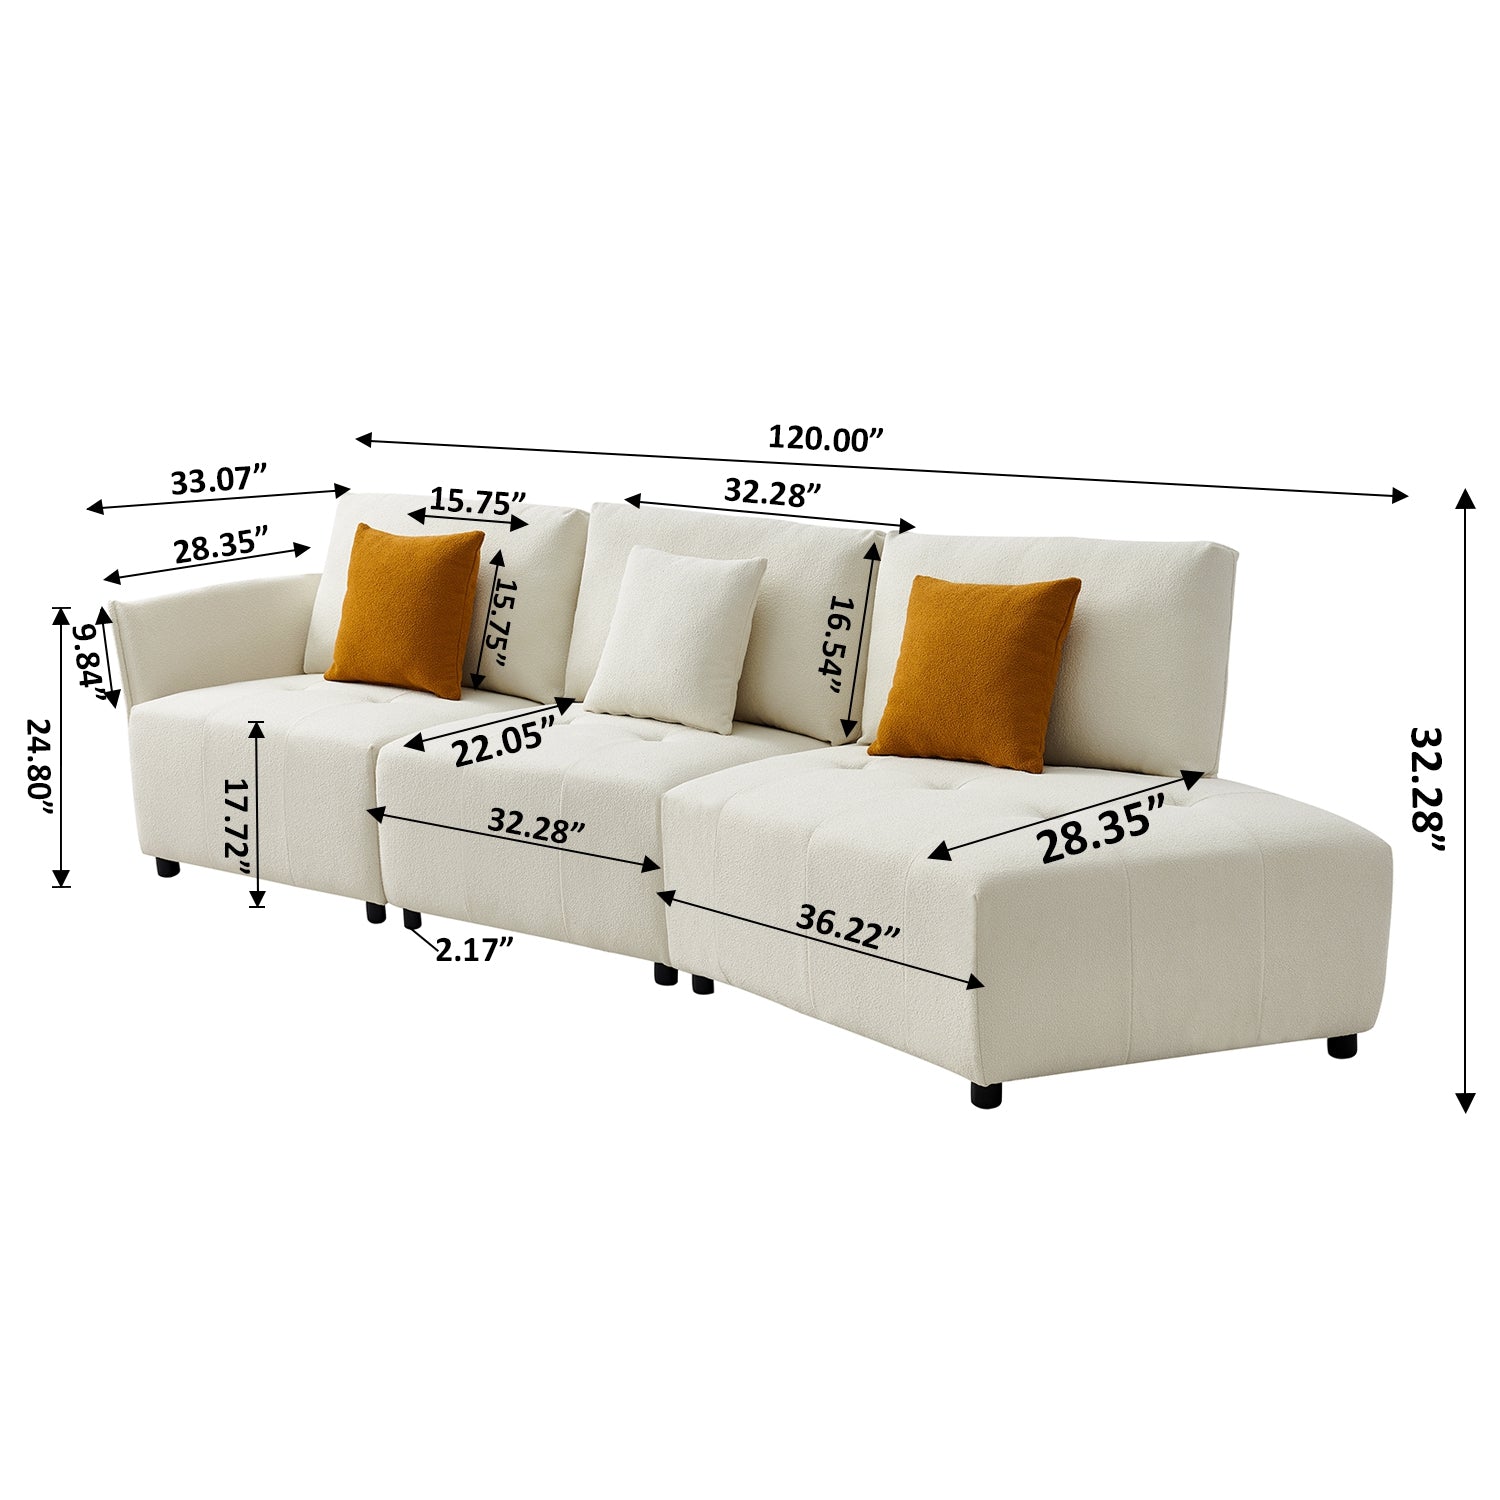 Bellemave 120" Teddy Fabric Sofa, Modern Modular Sectional Couch, Button Tufted Seat Cushion